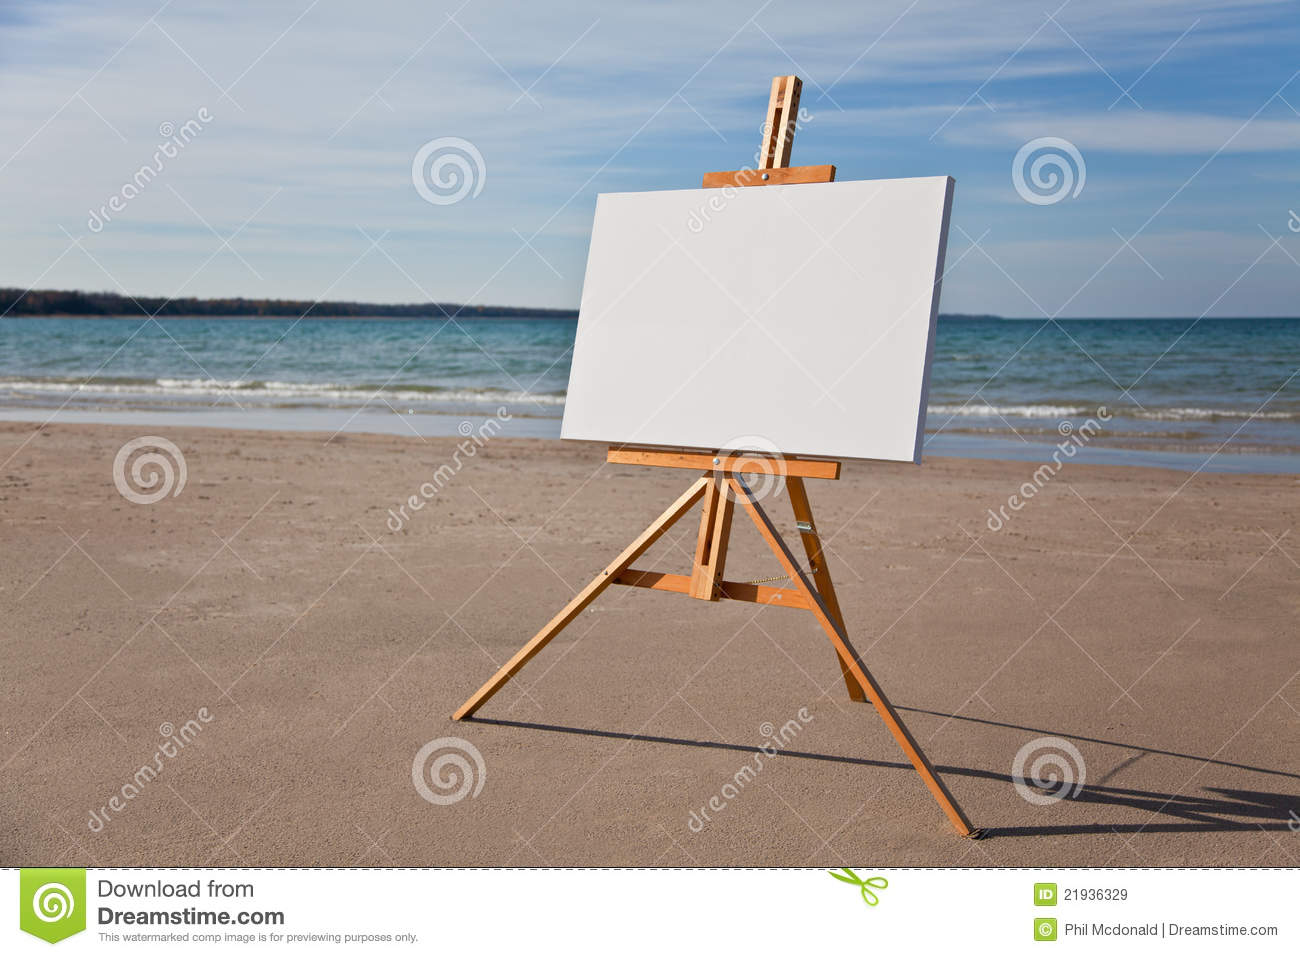 Canvas And Easel On Beach Horizontal Royalty Free Stock Images   Image